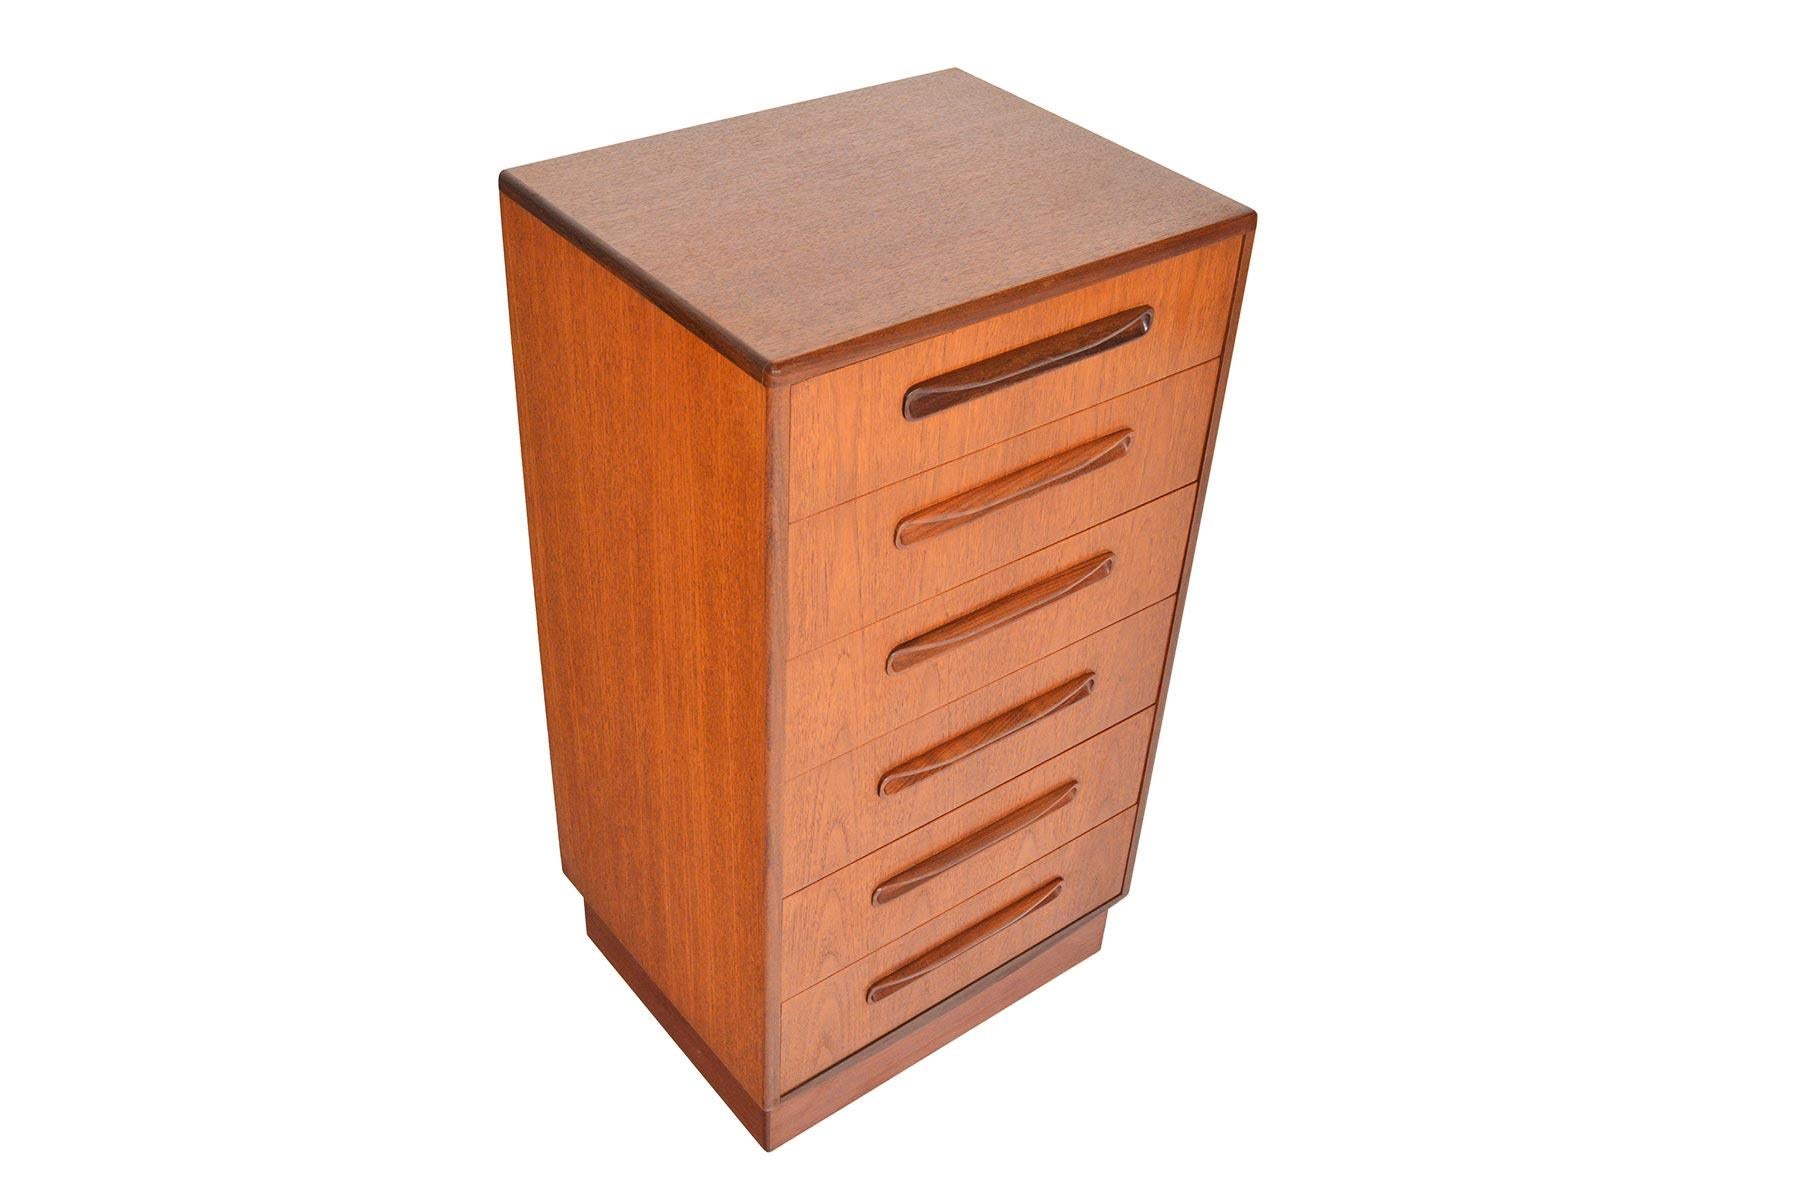 This English modern G Plan Fresco lingerie chest was designed by Victor Wilkins in the 1960s. This fantastic dresser features six deep drawers with solid teak drawer fronts and carved afrormosia pulls. With its slender design, this piece is perfect